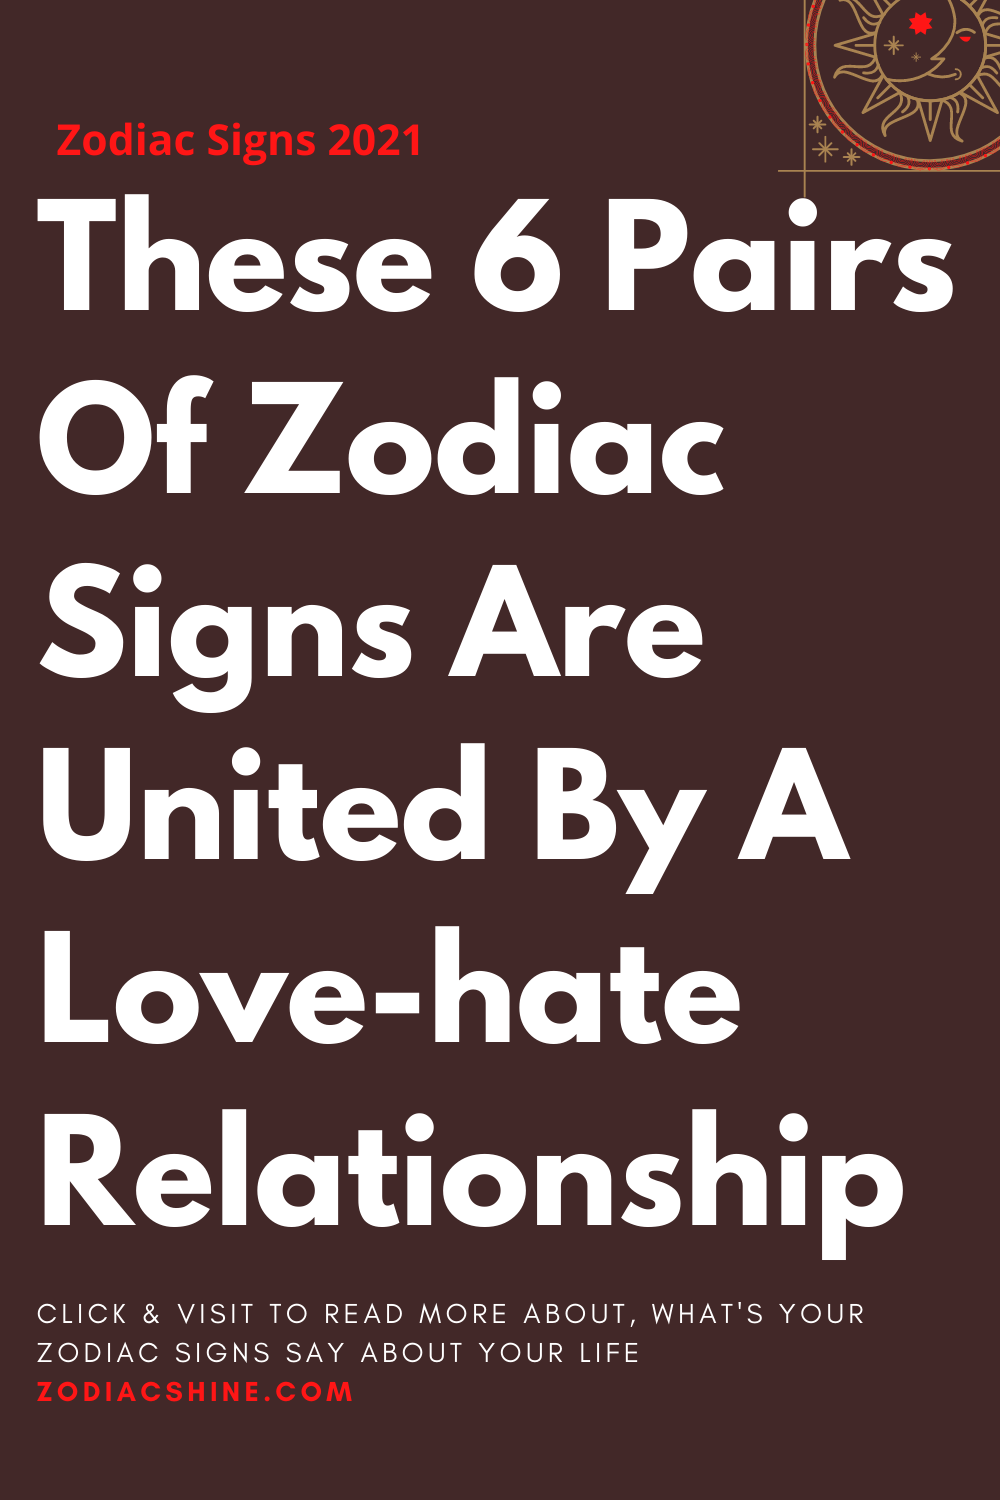 These 6 Pairs Of Zodiac Signs Are United By A Love-hate Relationship